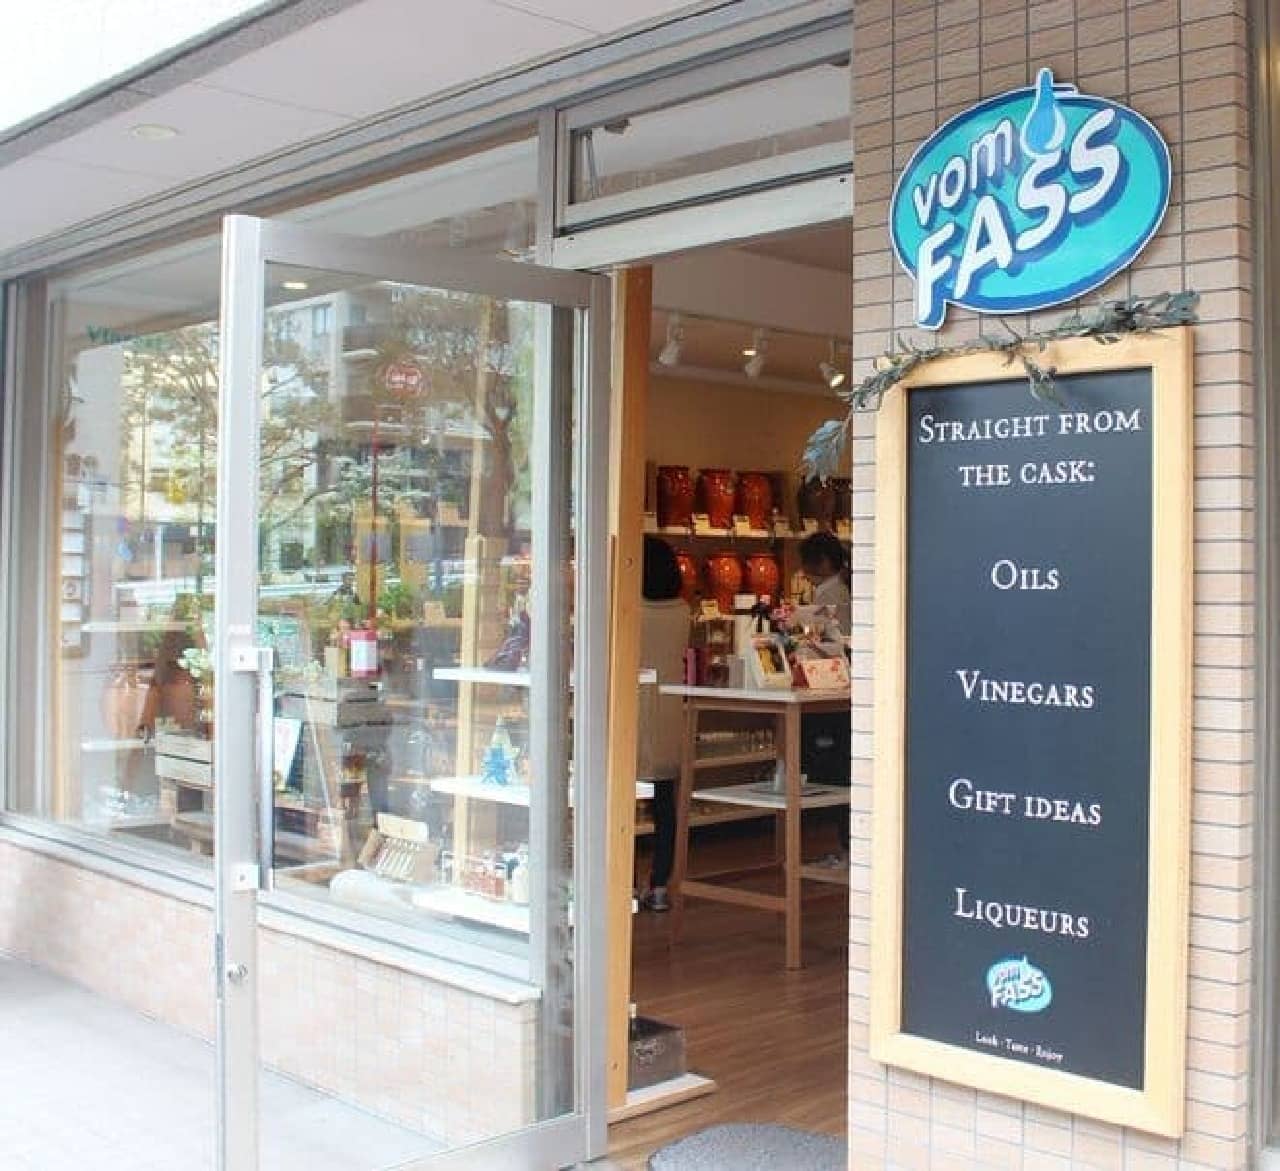 Buy olive oil at "VOM FASS" Daikanyama store, which sells olive oil by weight